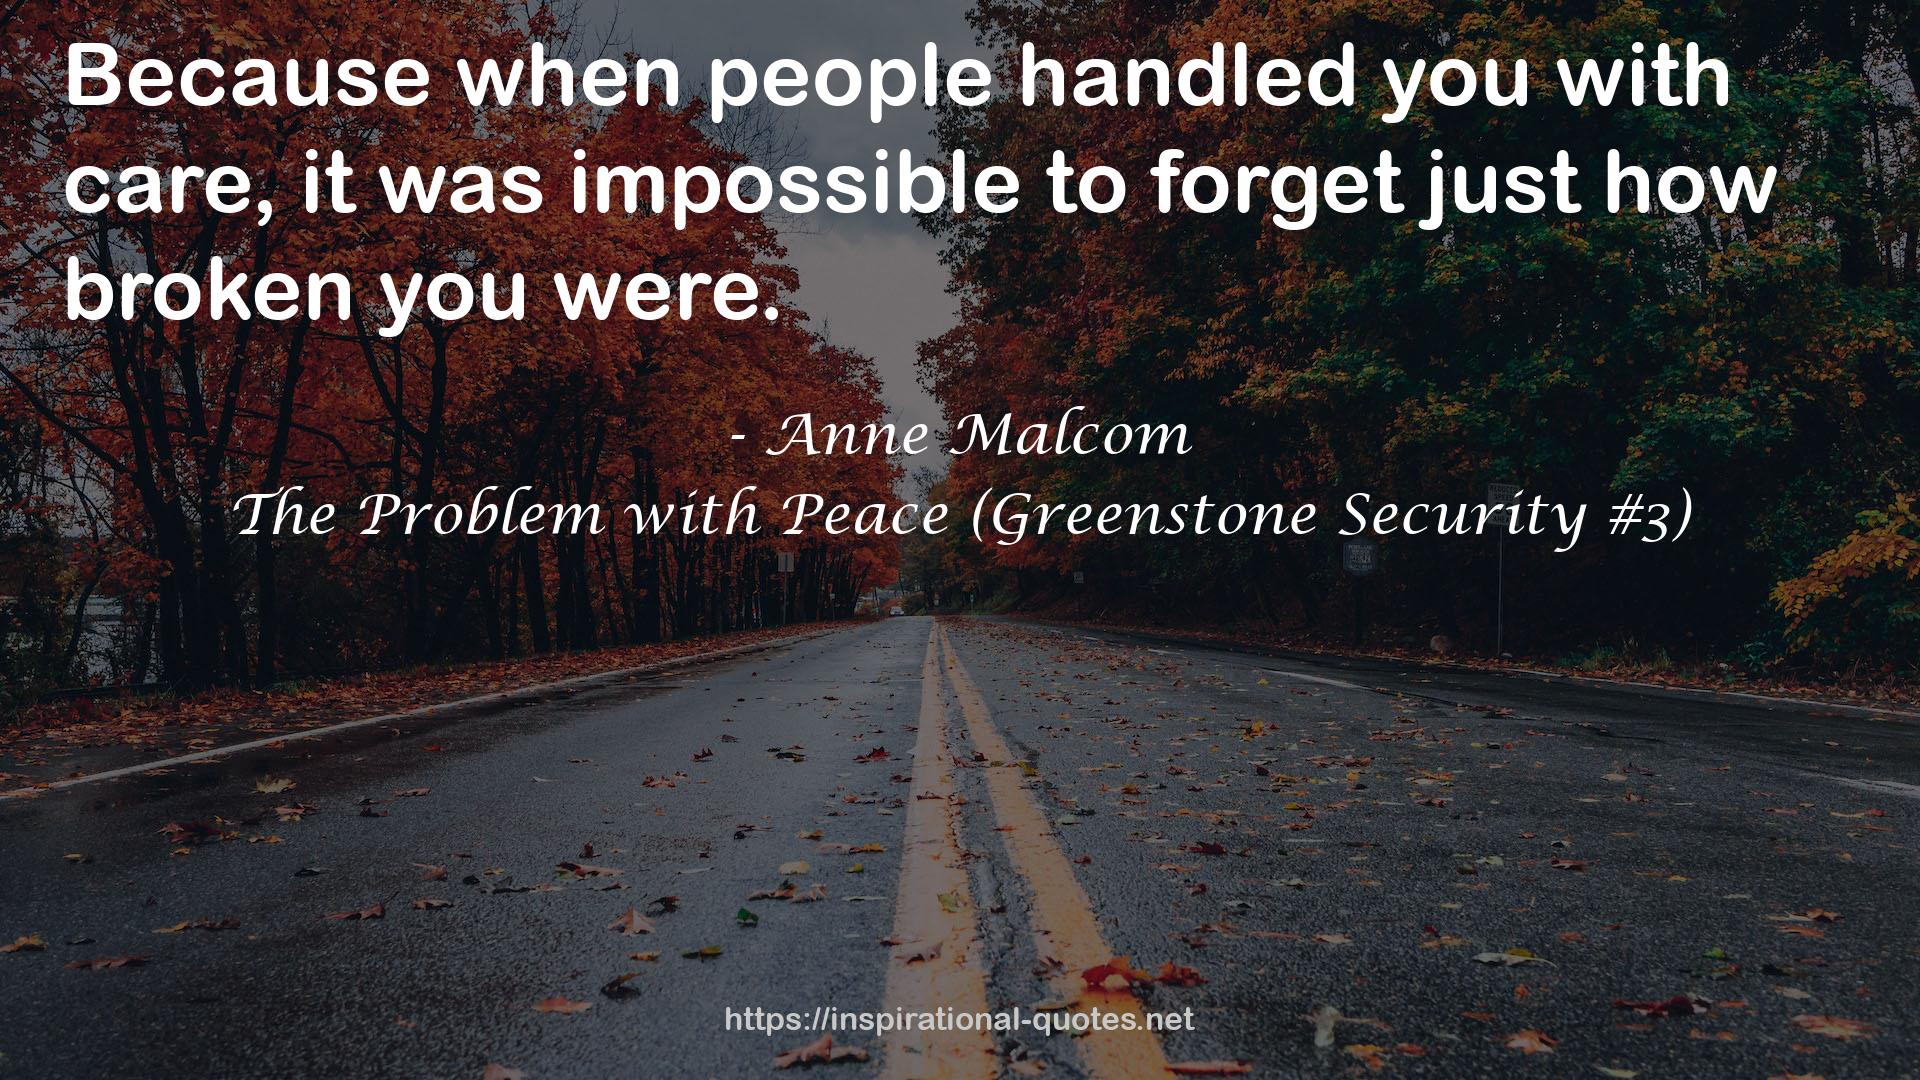 The Problem with Peace (Greenstone Security #3) QUOTES